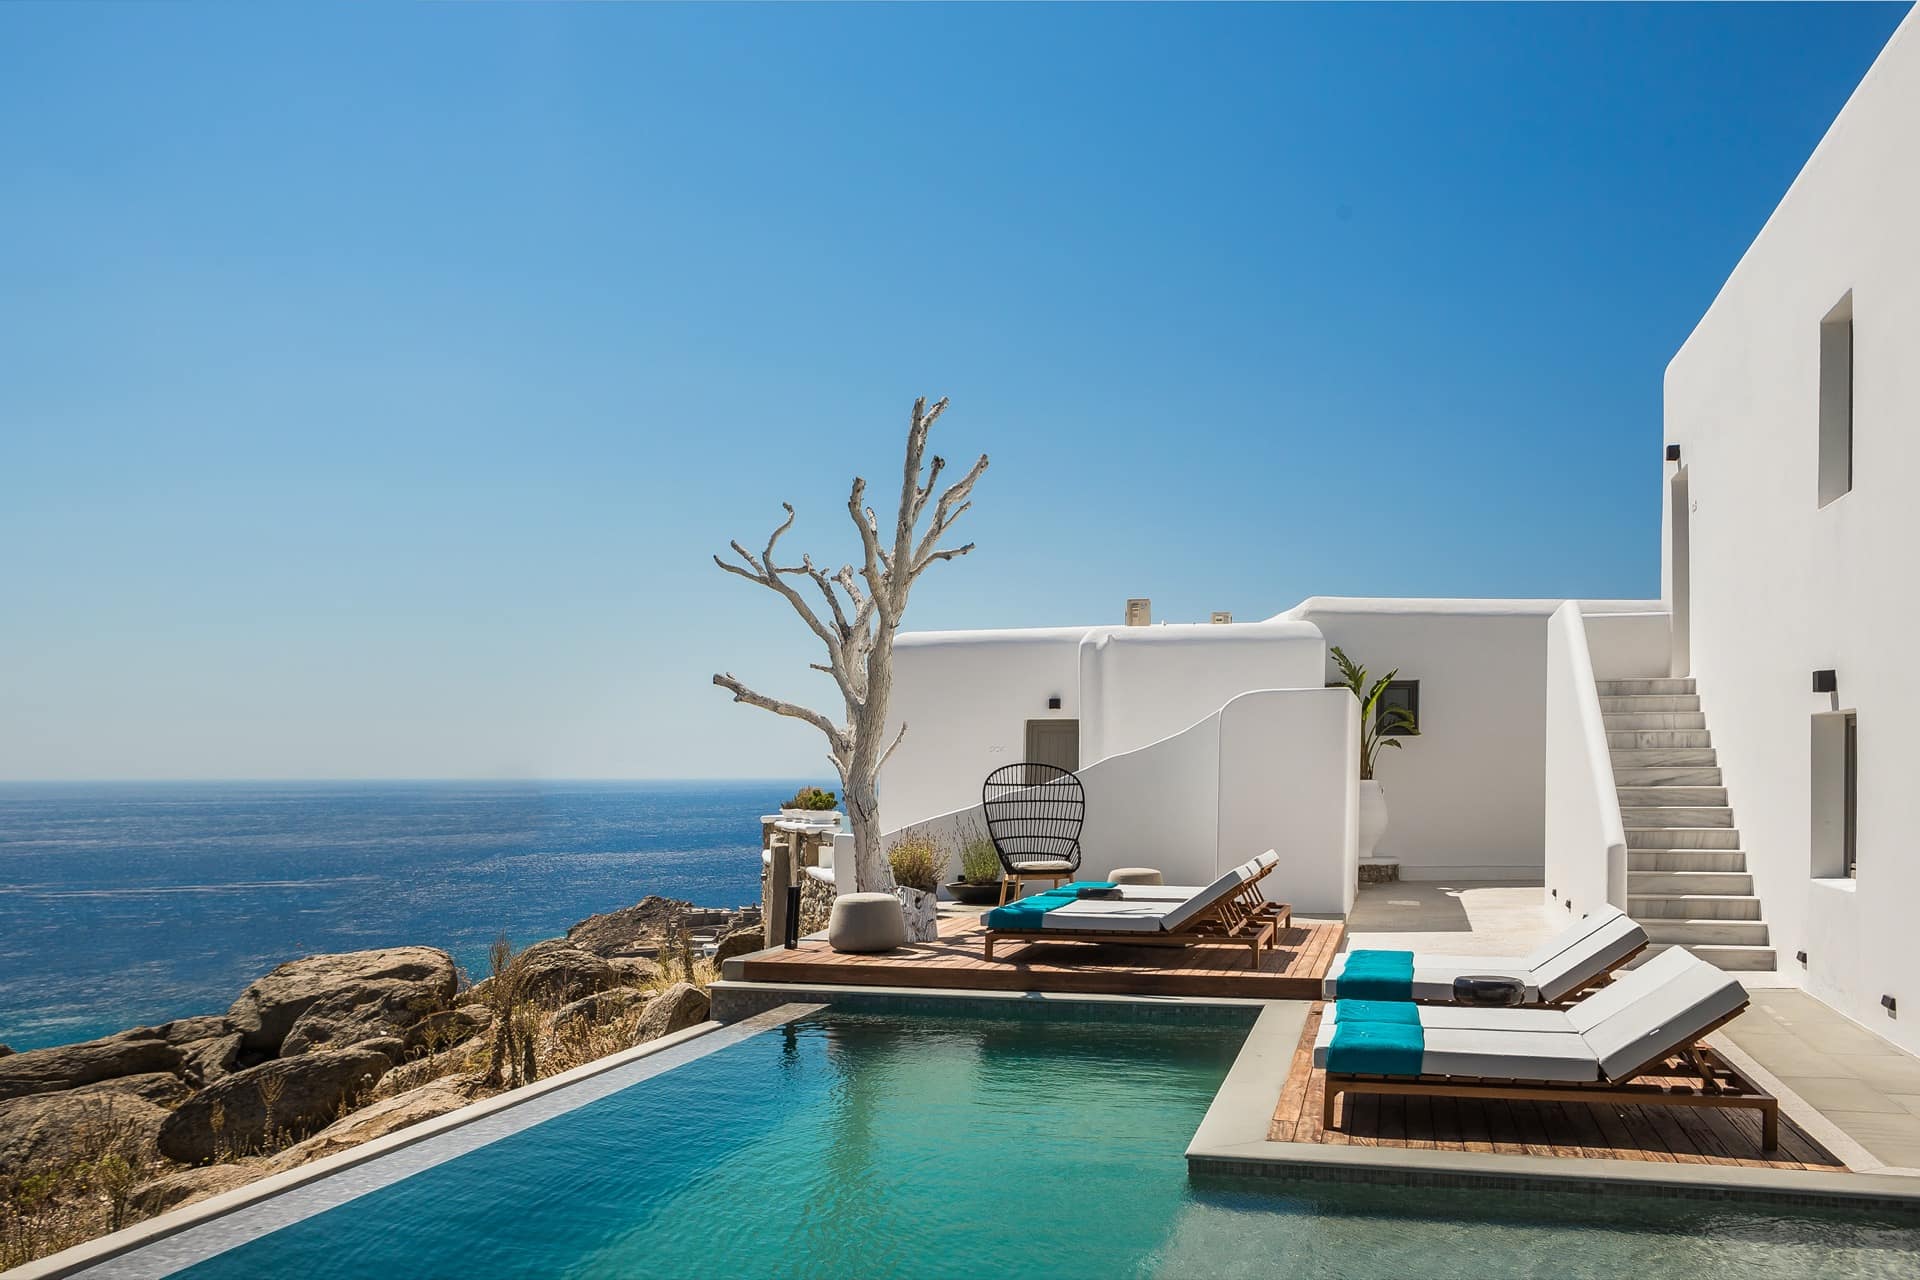 The photo shows a luxurious Mykonos hotel room decorated in white with a balcony overlooking the ocean and a swimming pool.